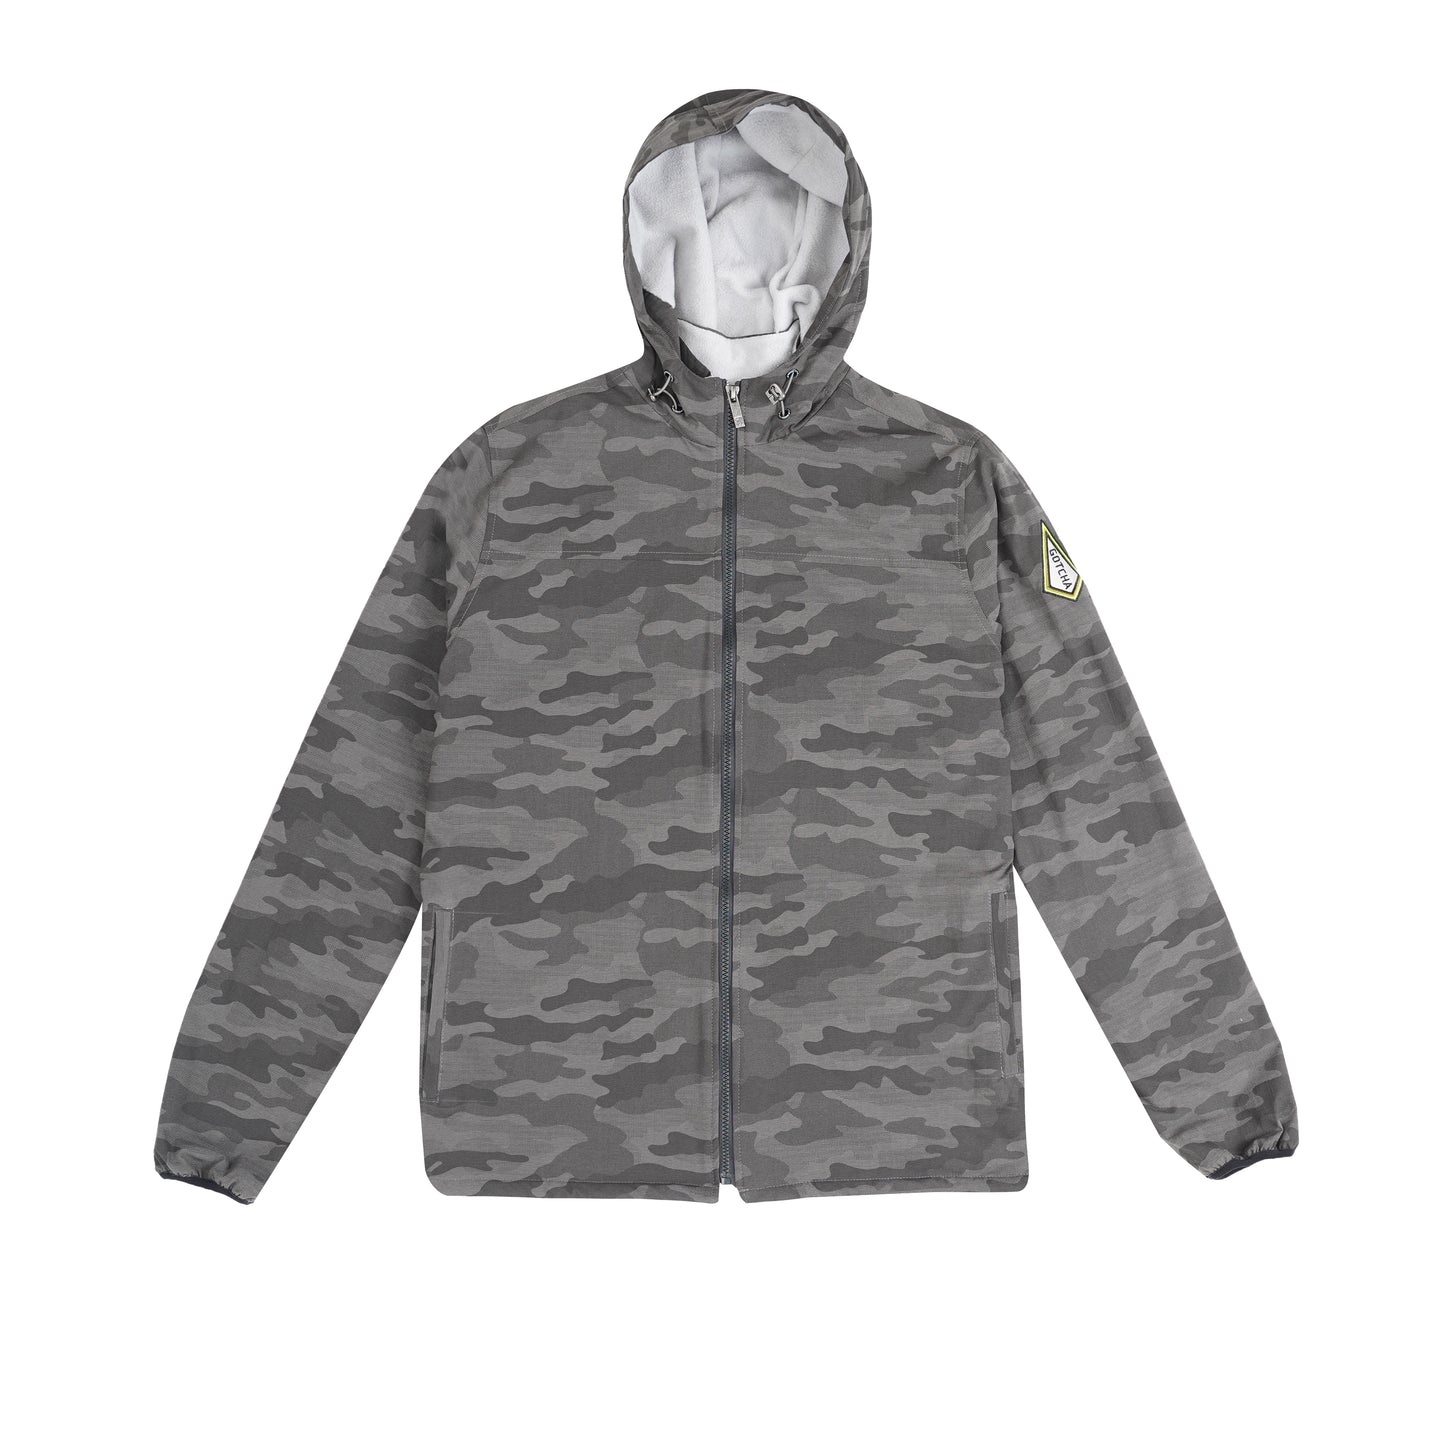 Buy Camouflage gray lined hooded jacket in dubai